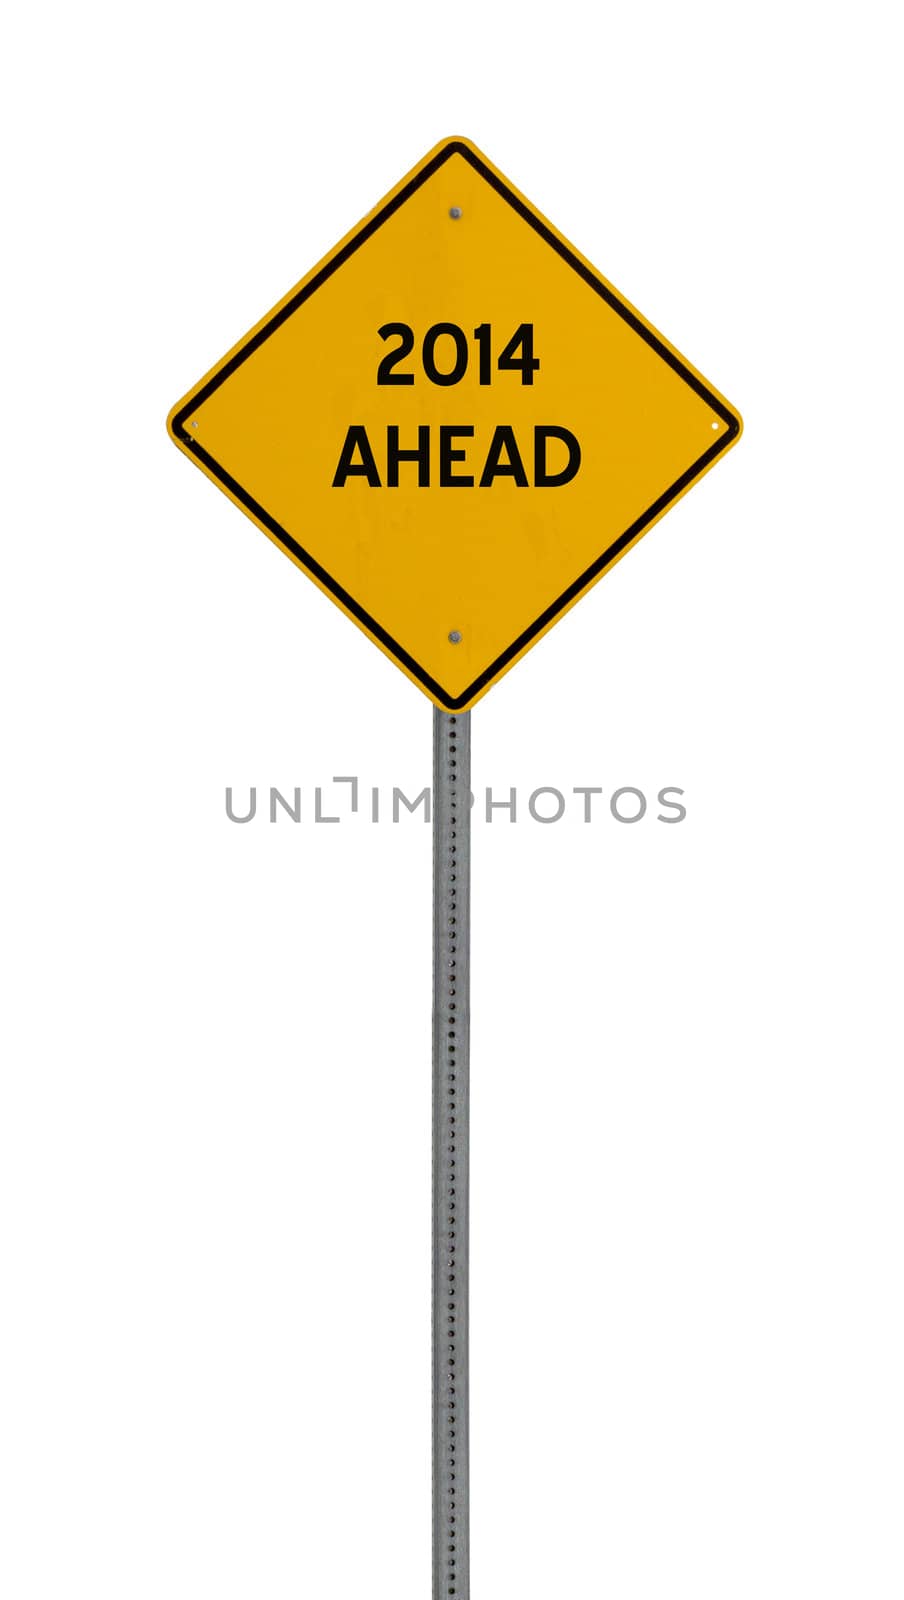 2014 ahead - Yellow road warning sign by jeremywhat